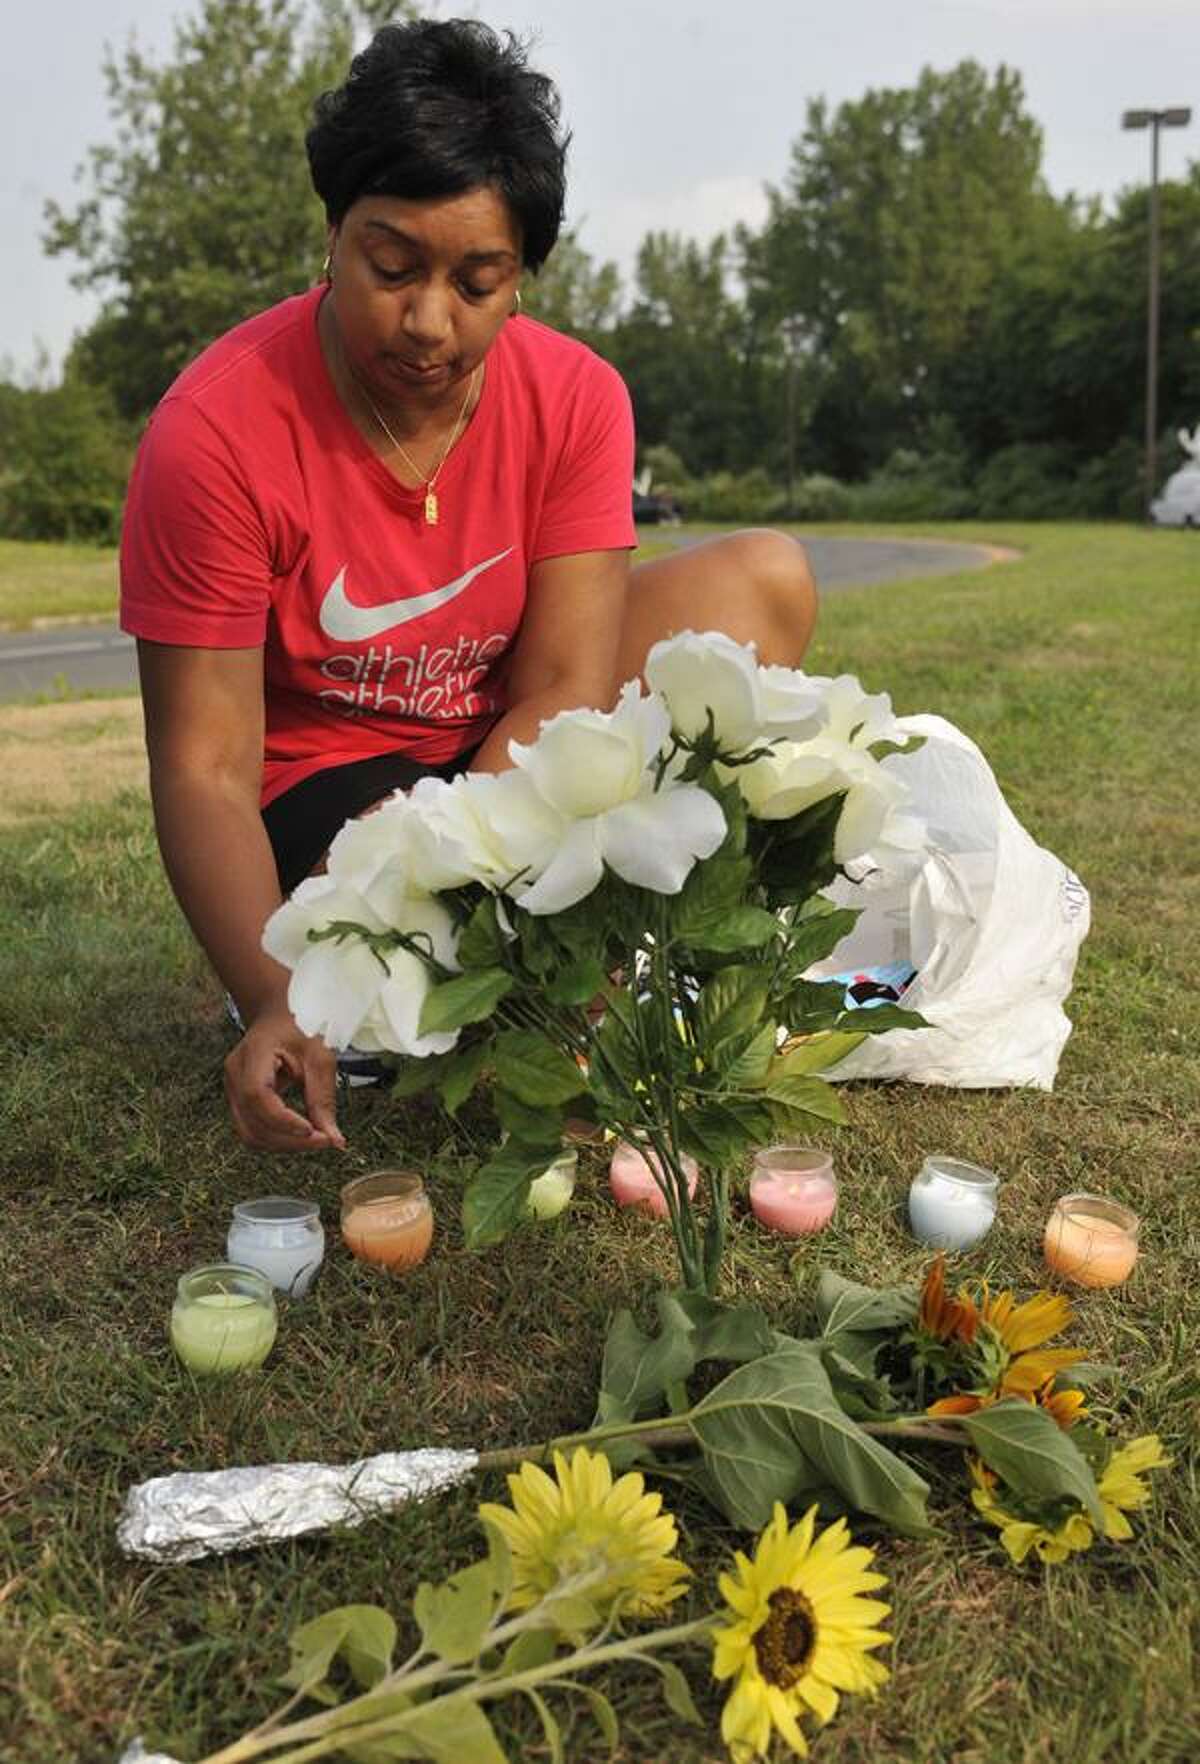 Terrie Thomas, of South Windsor, lights a candle for each victim killed outside of Hartford Distributors in Manchester, Conn., Wednesday, Aug. 4, 2010. Omar S. Thornton, a driver for Hartford Distributors, killed eight people, plus himself at the beer distribution company in Connecticut on Tuesday morning. (AP Photo/Jessica Hill)